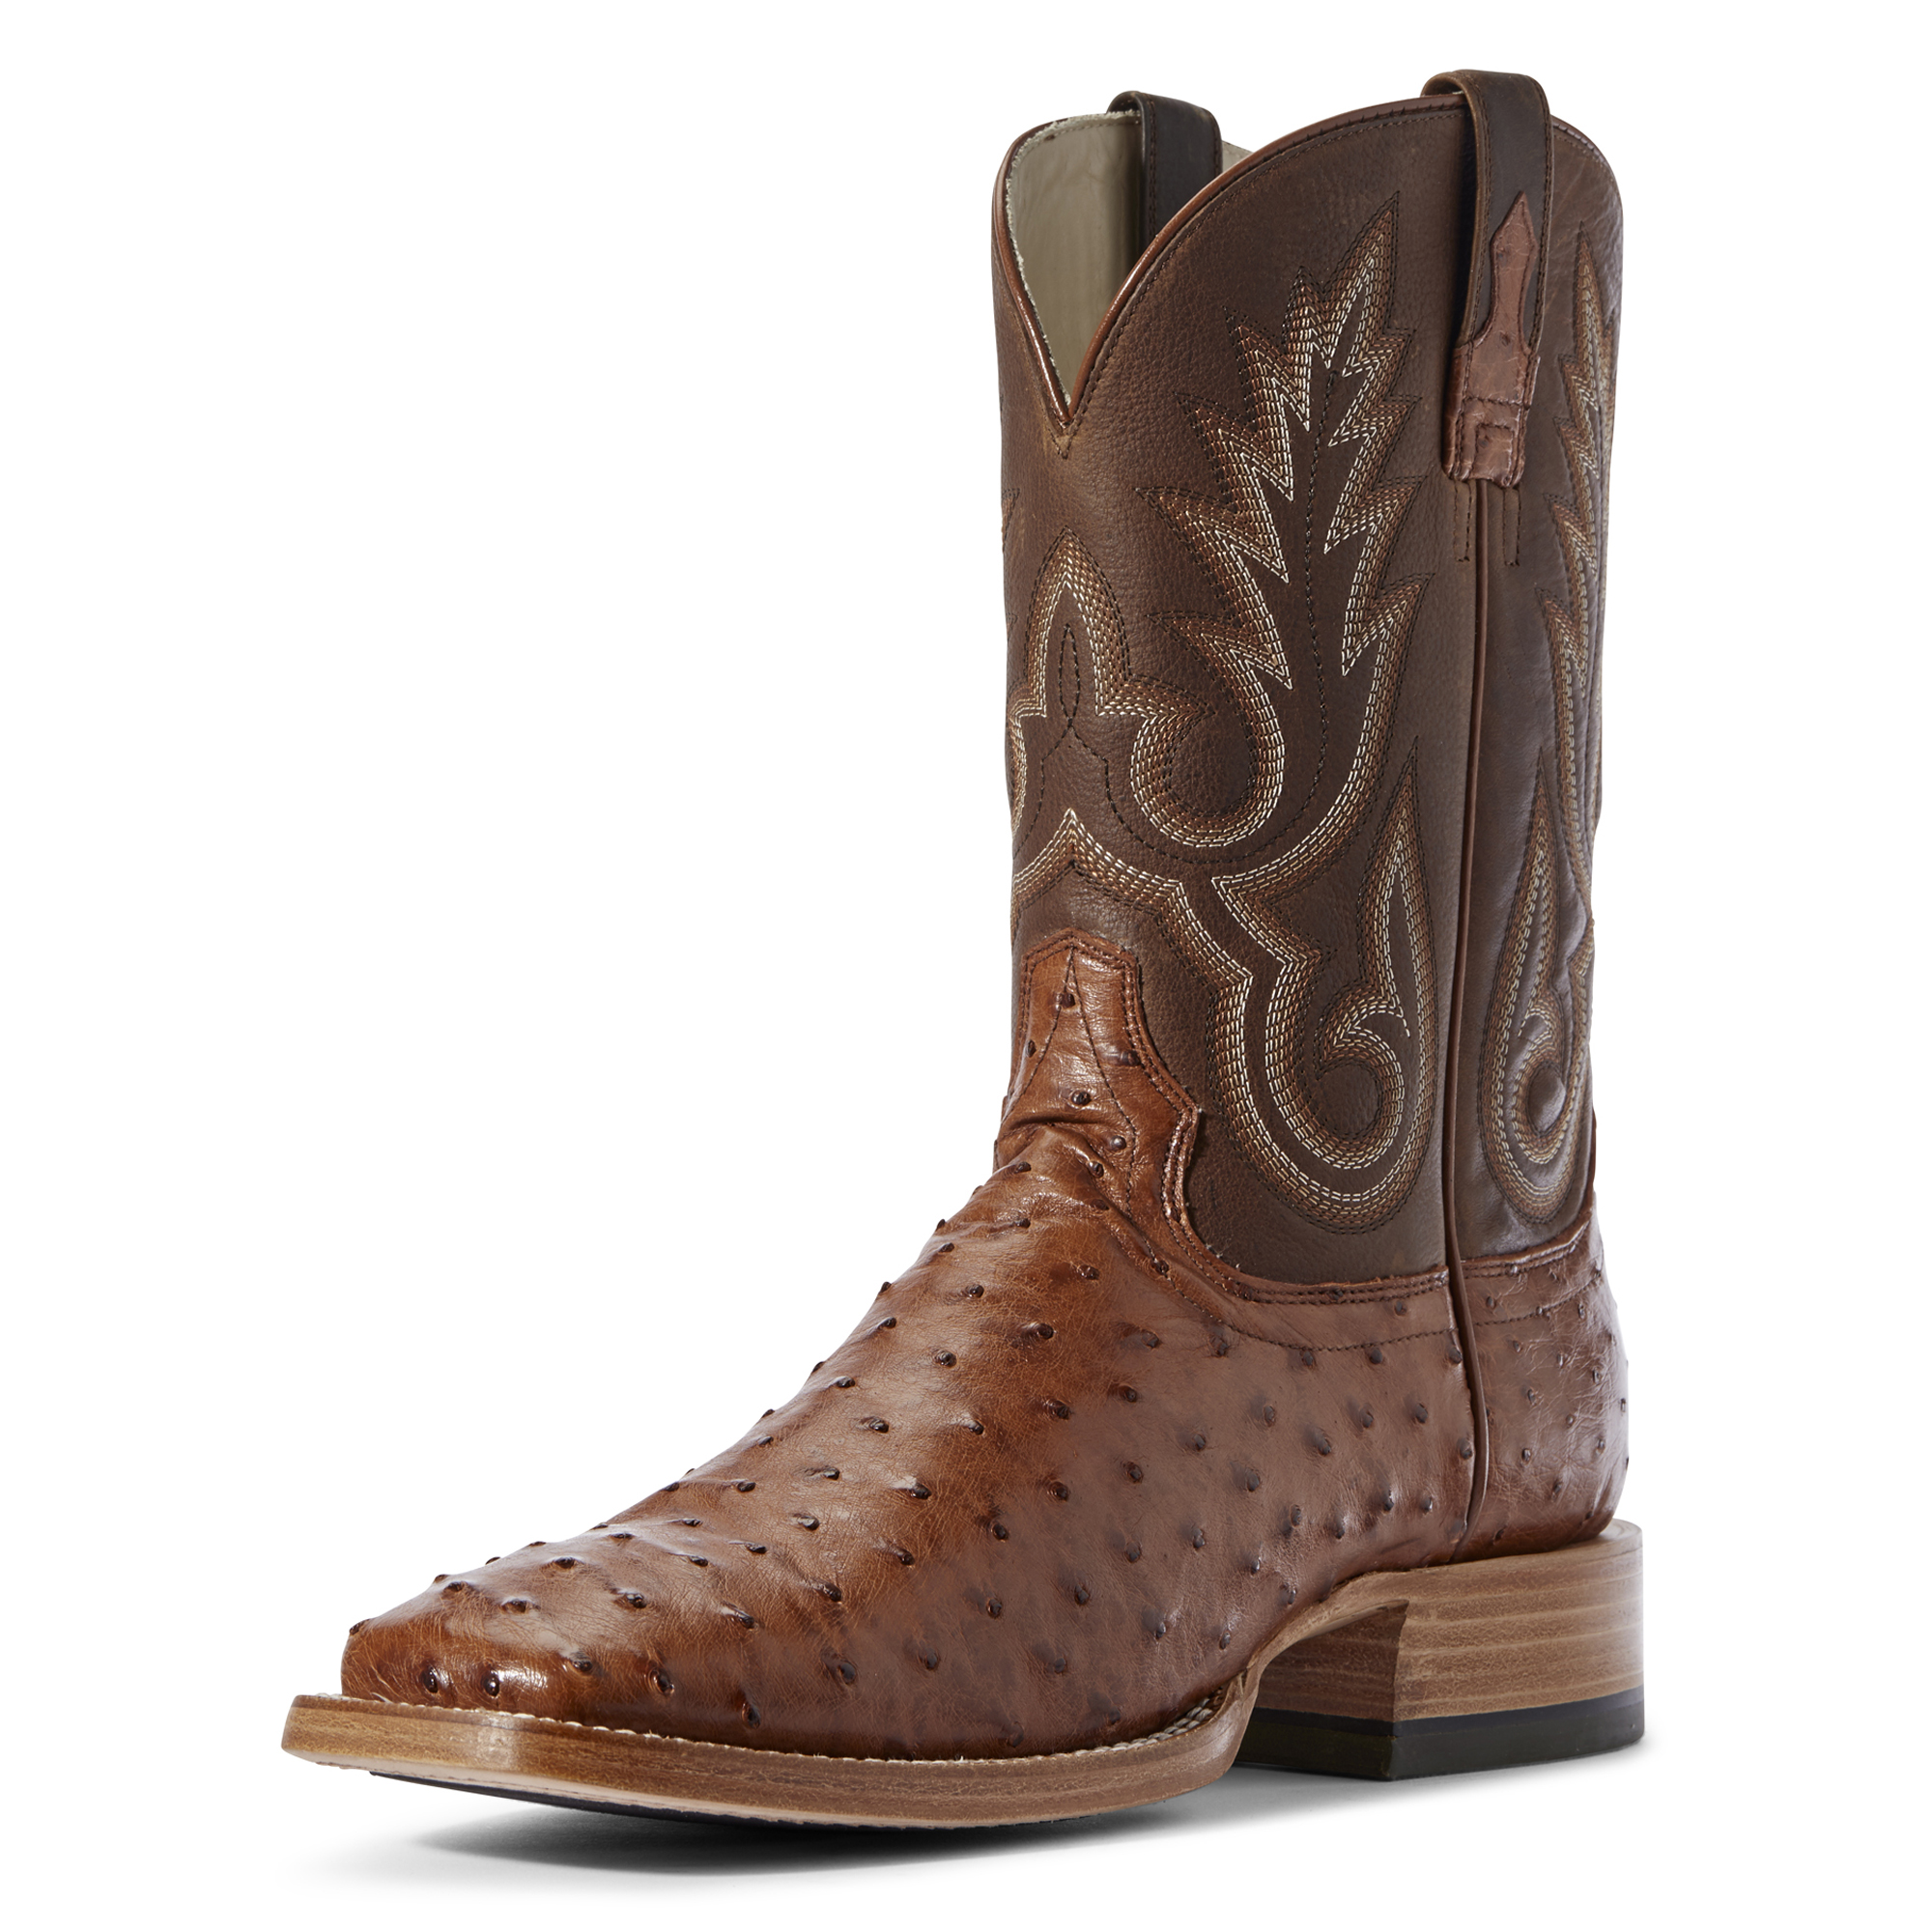 Men's New Leather Ostrich Quill Design Western Cowboy Rodeo Boots J Toe Cognac